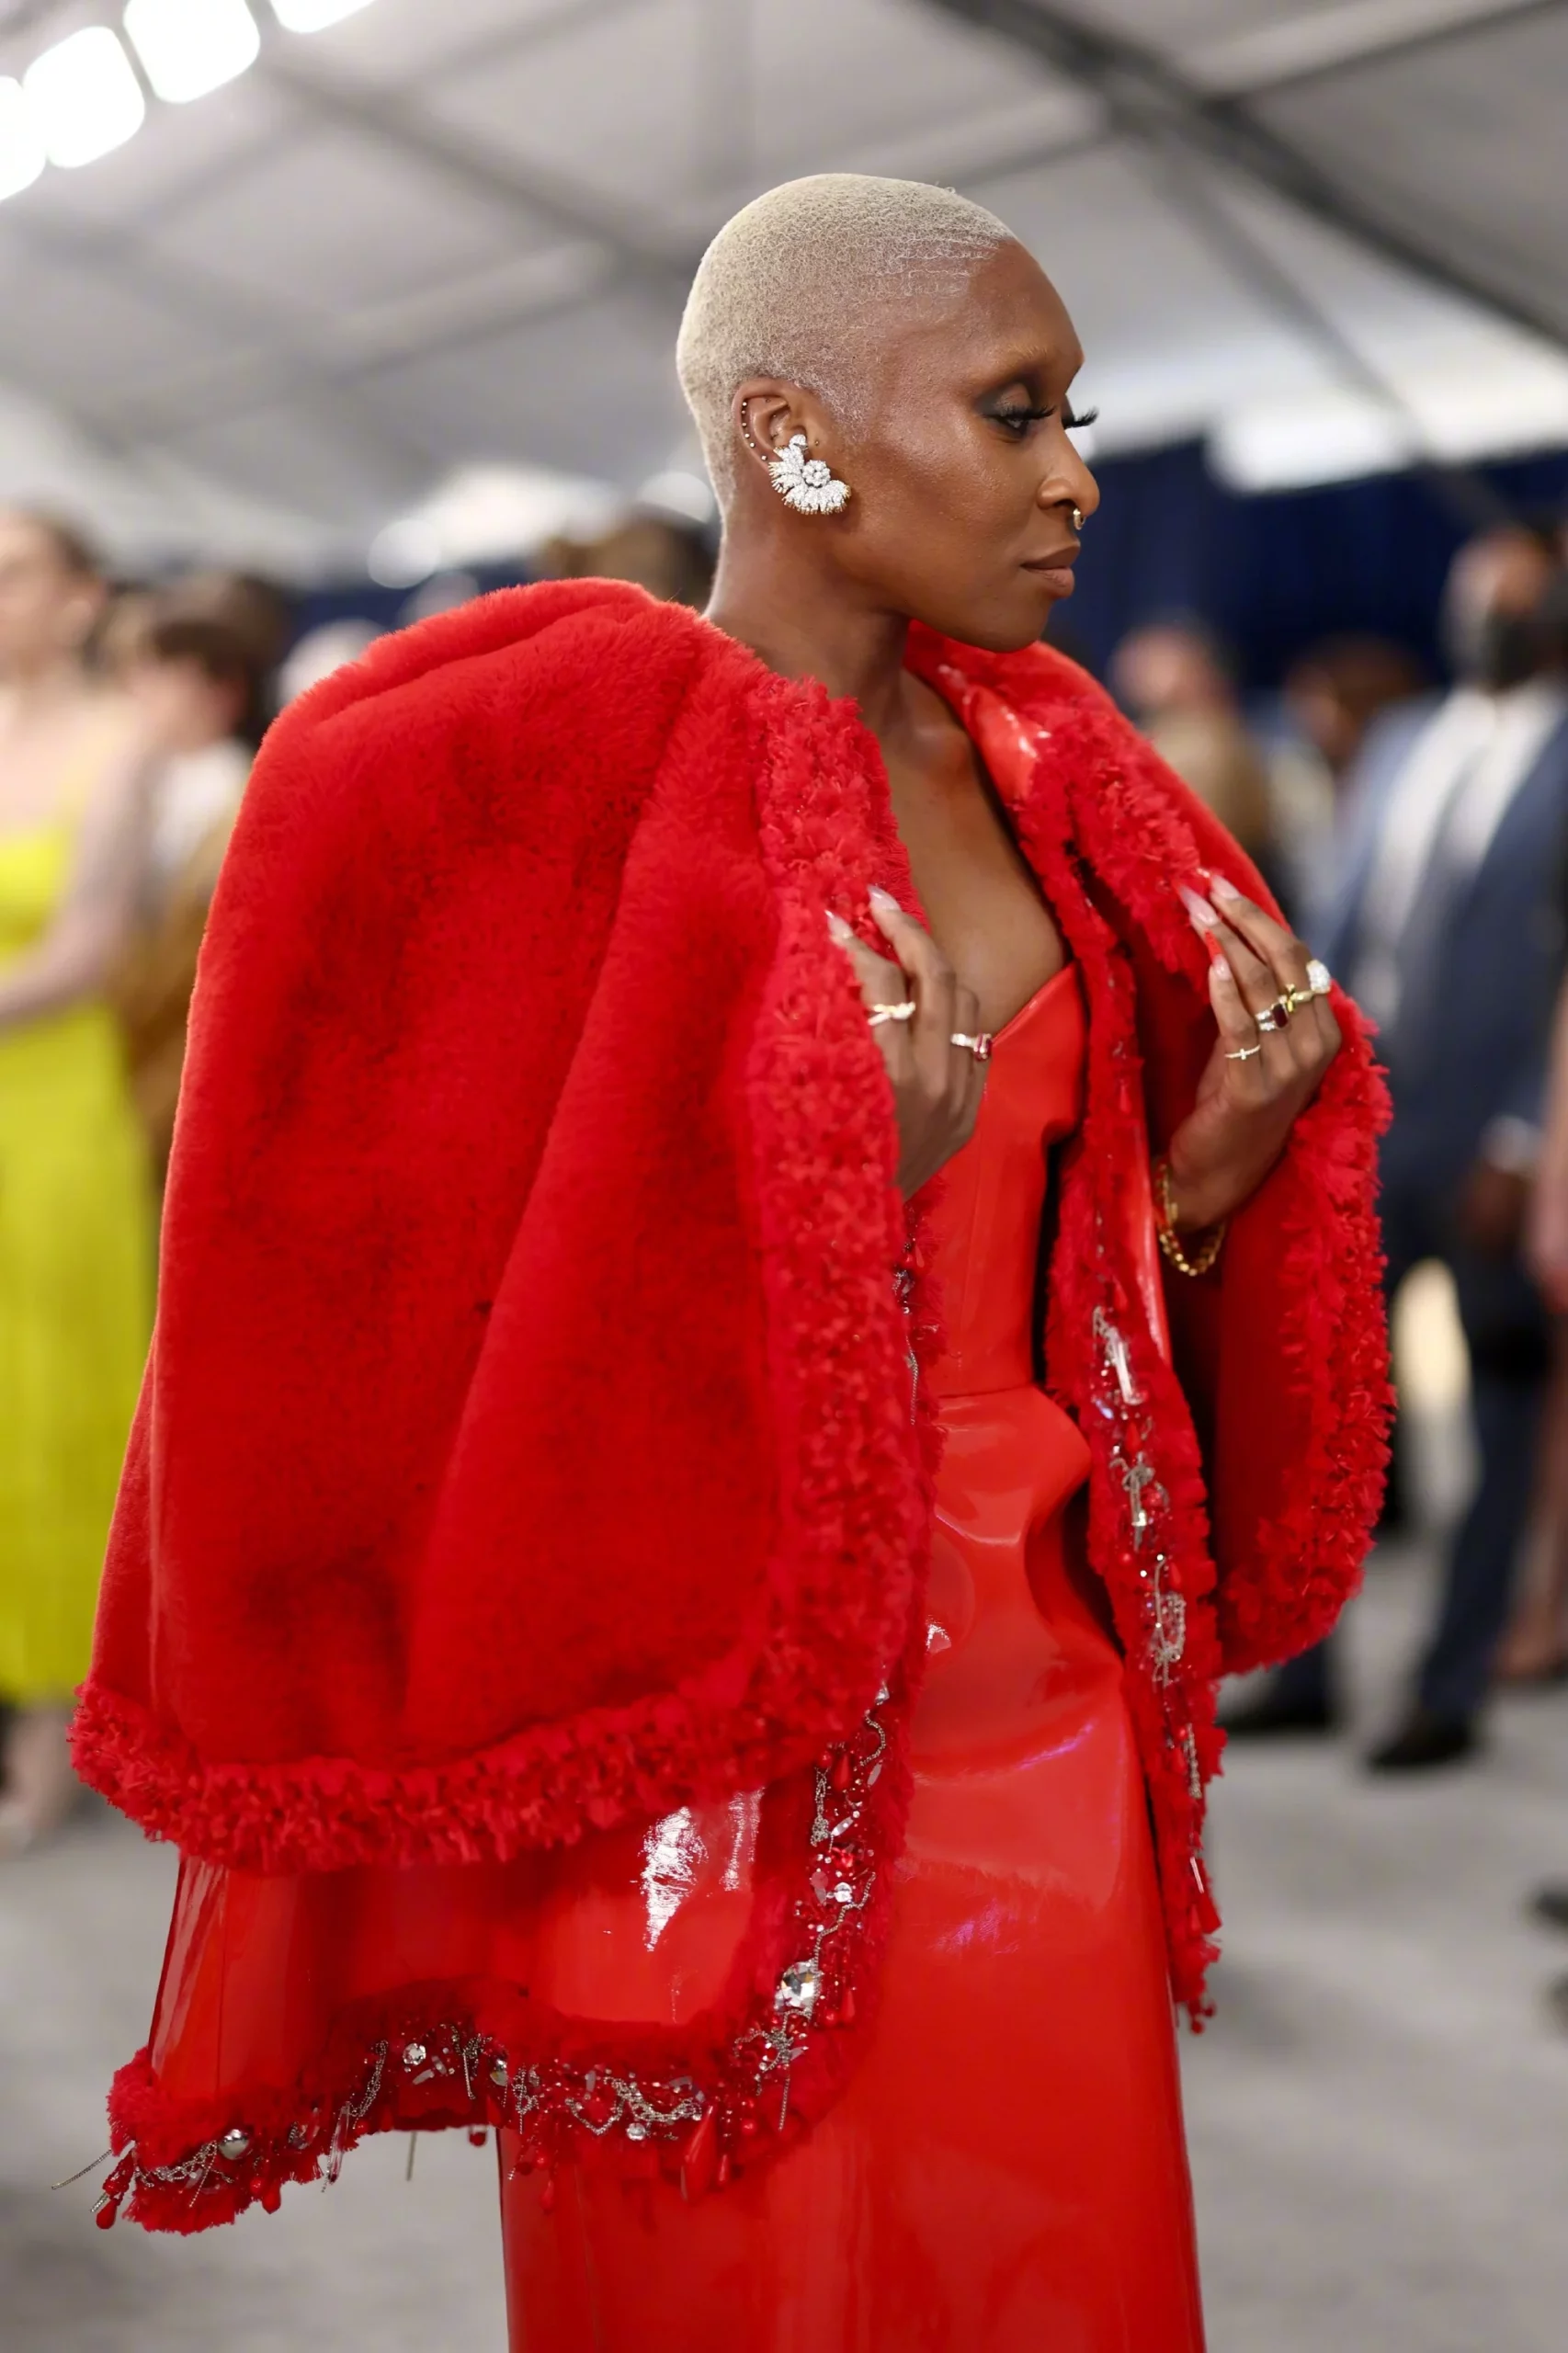 28th Screen Actors Guild Awards, Cynthia Erivo attended ​​​